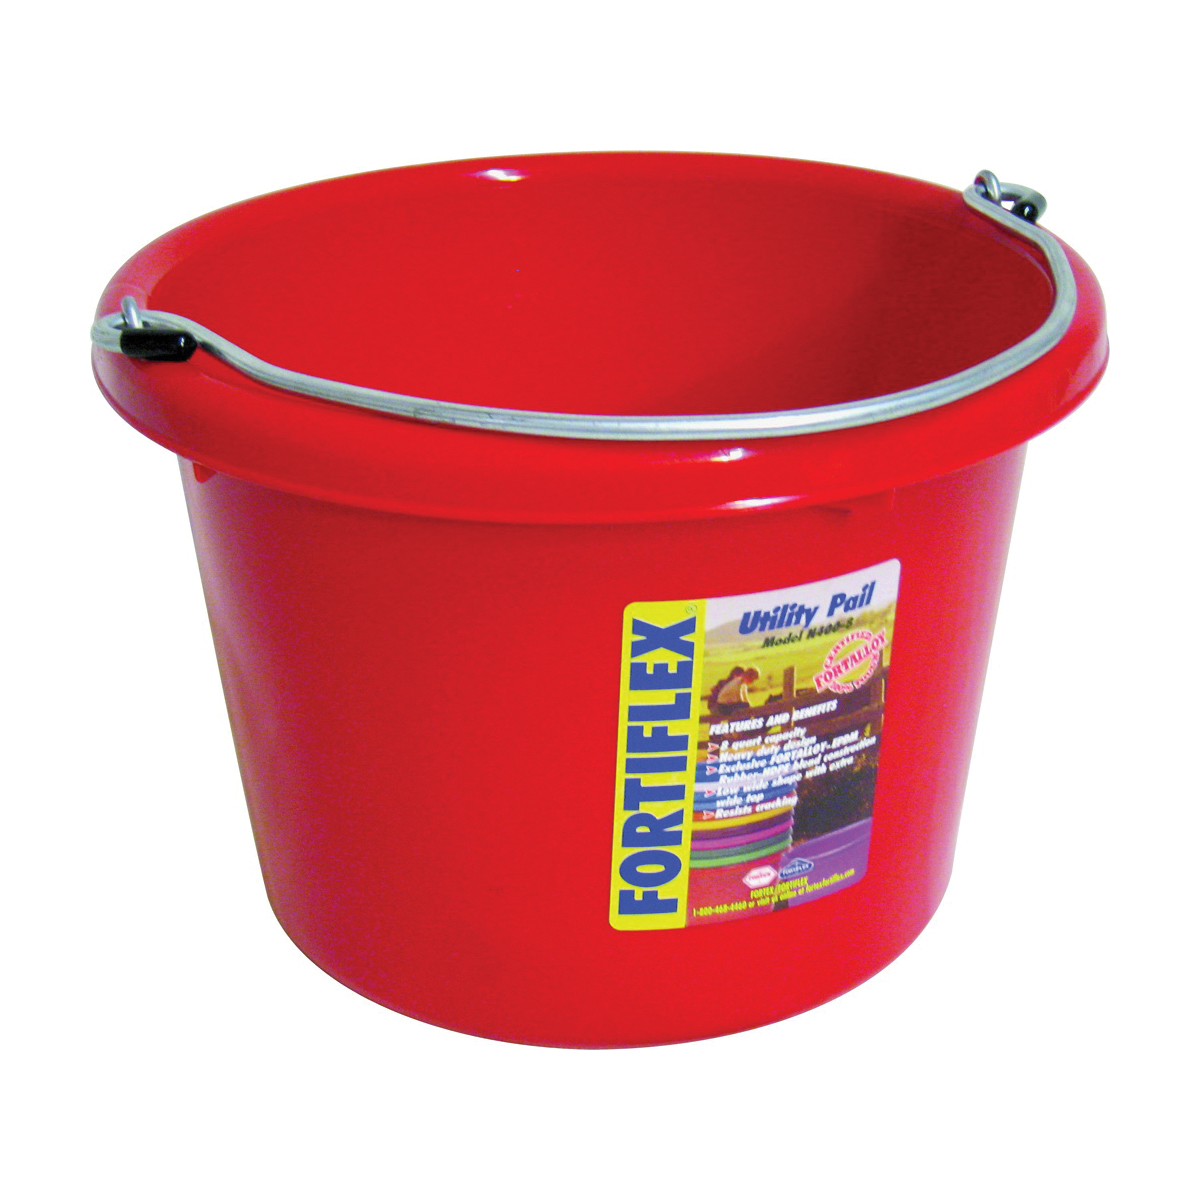 N4008R Utility Pail, 8 qt Volume, Fortalloy Rubber Polymer, Red